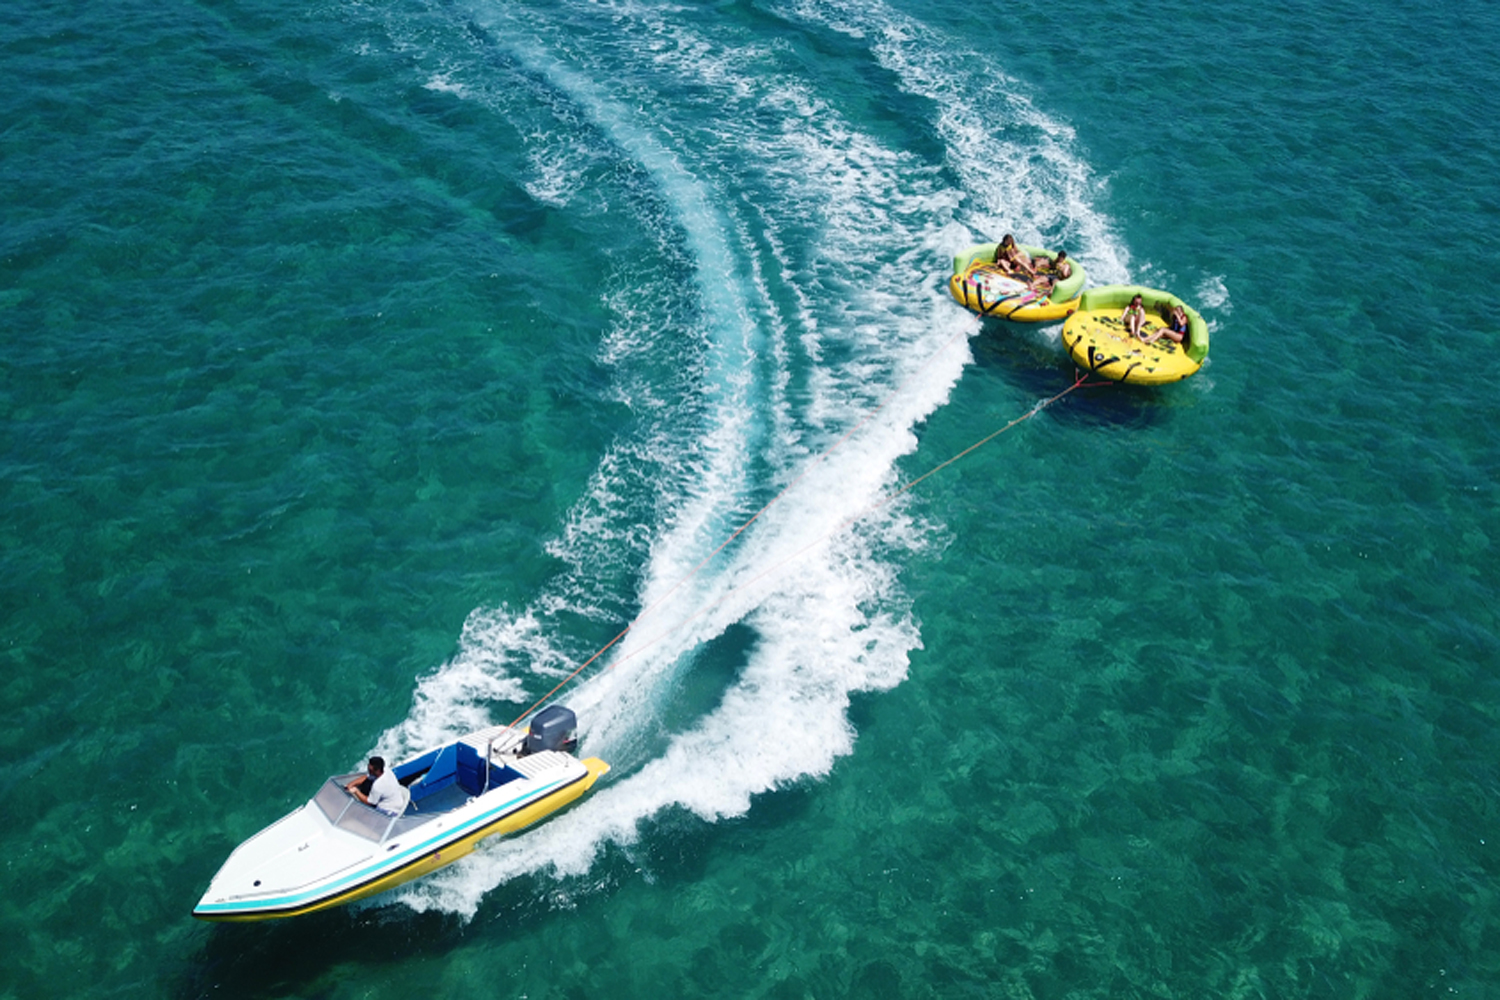 Top Watersports to try in Dubai